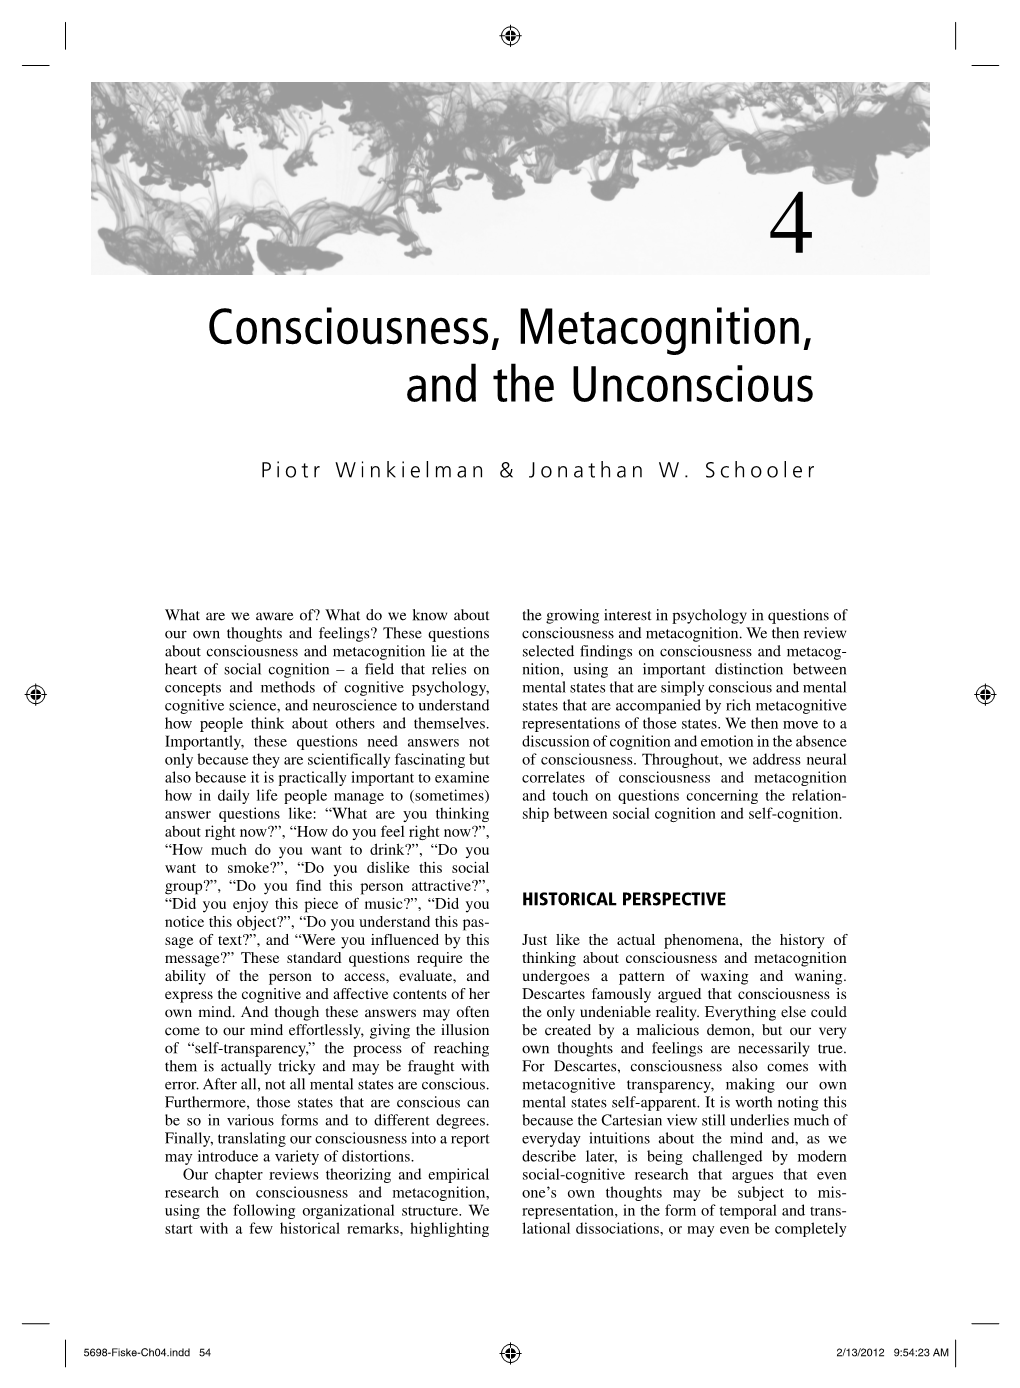 Consciousness, Metacognition, and the Unconscious